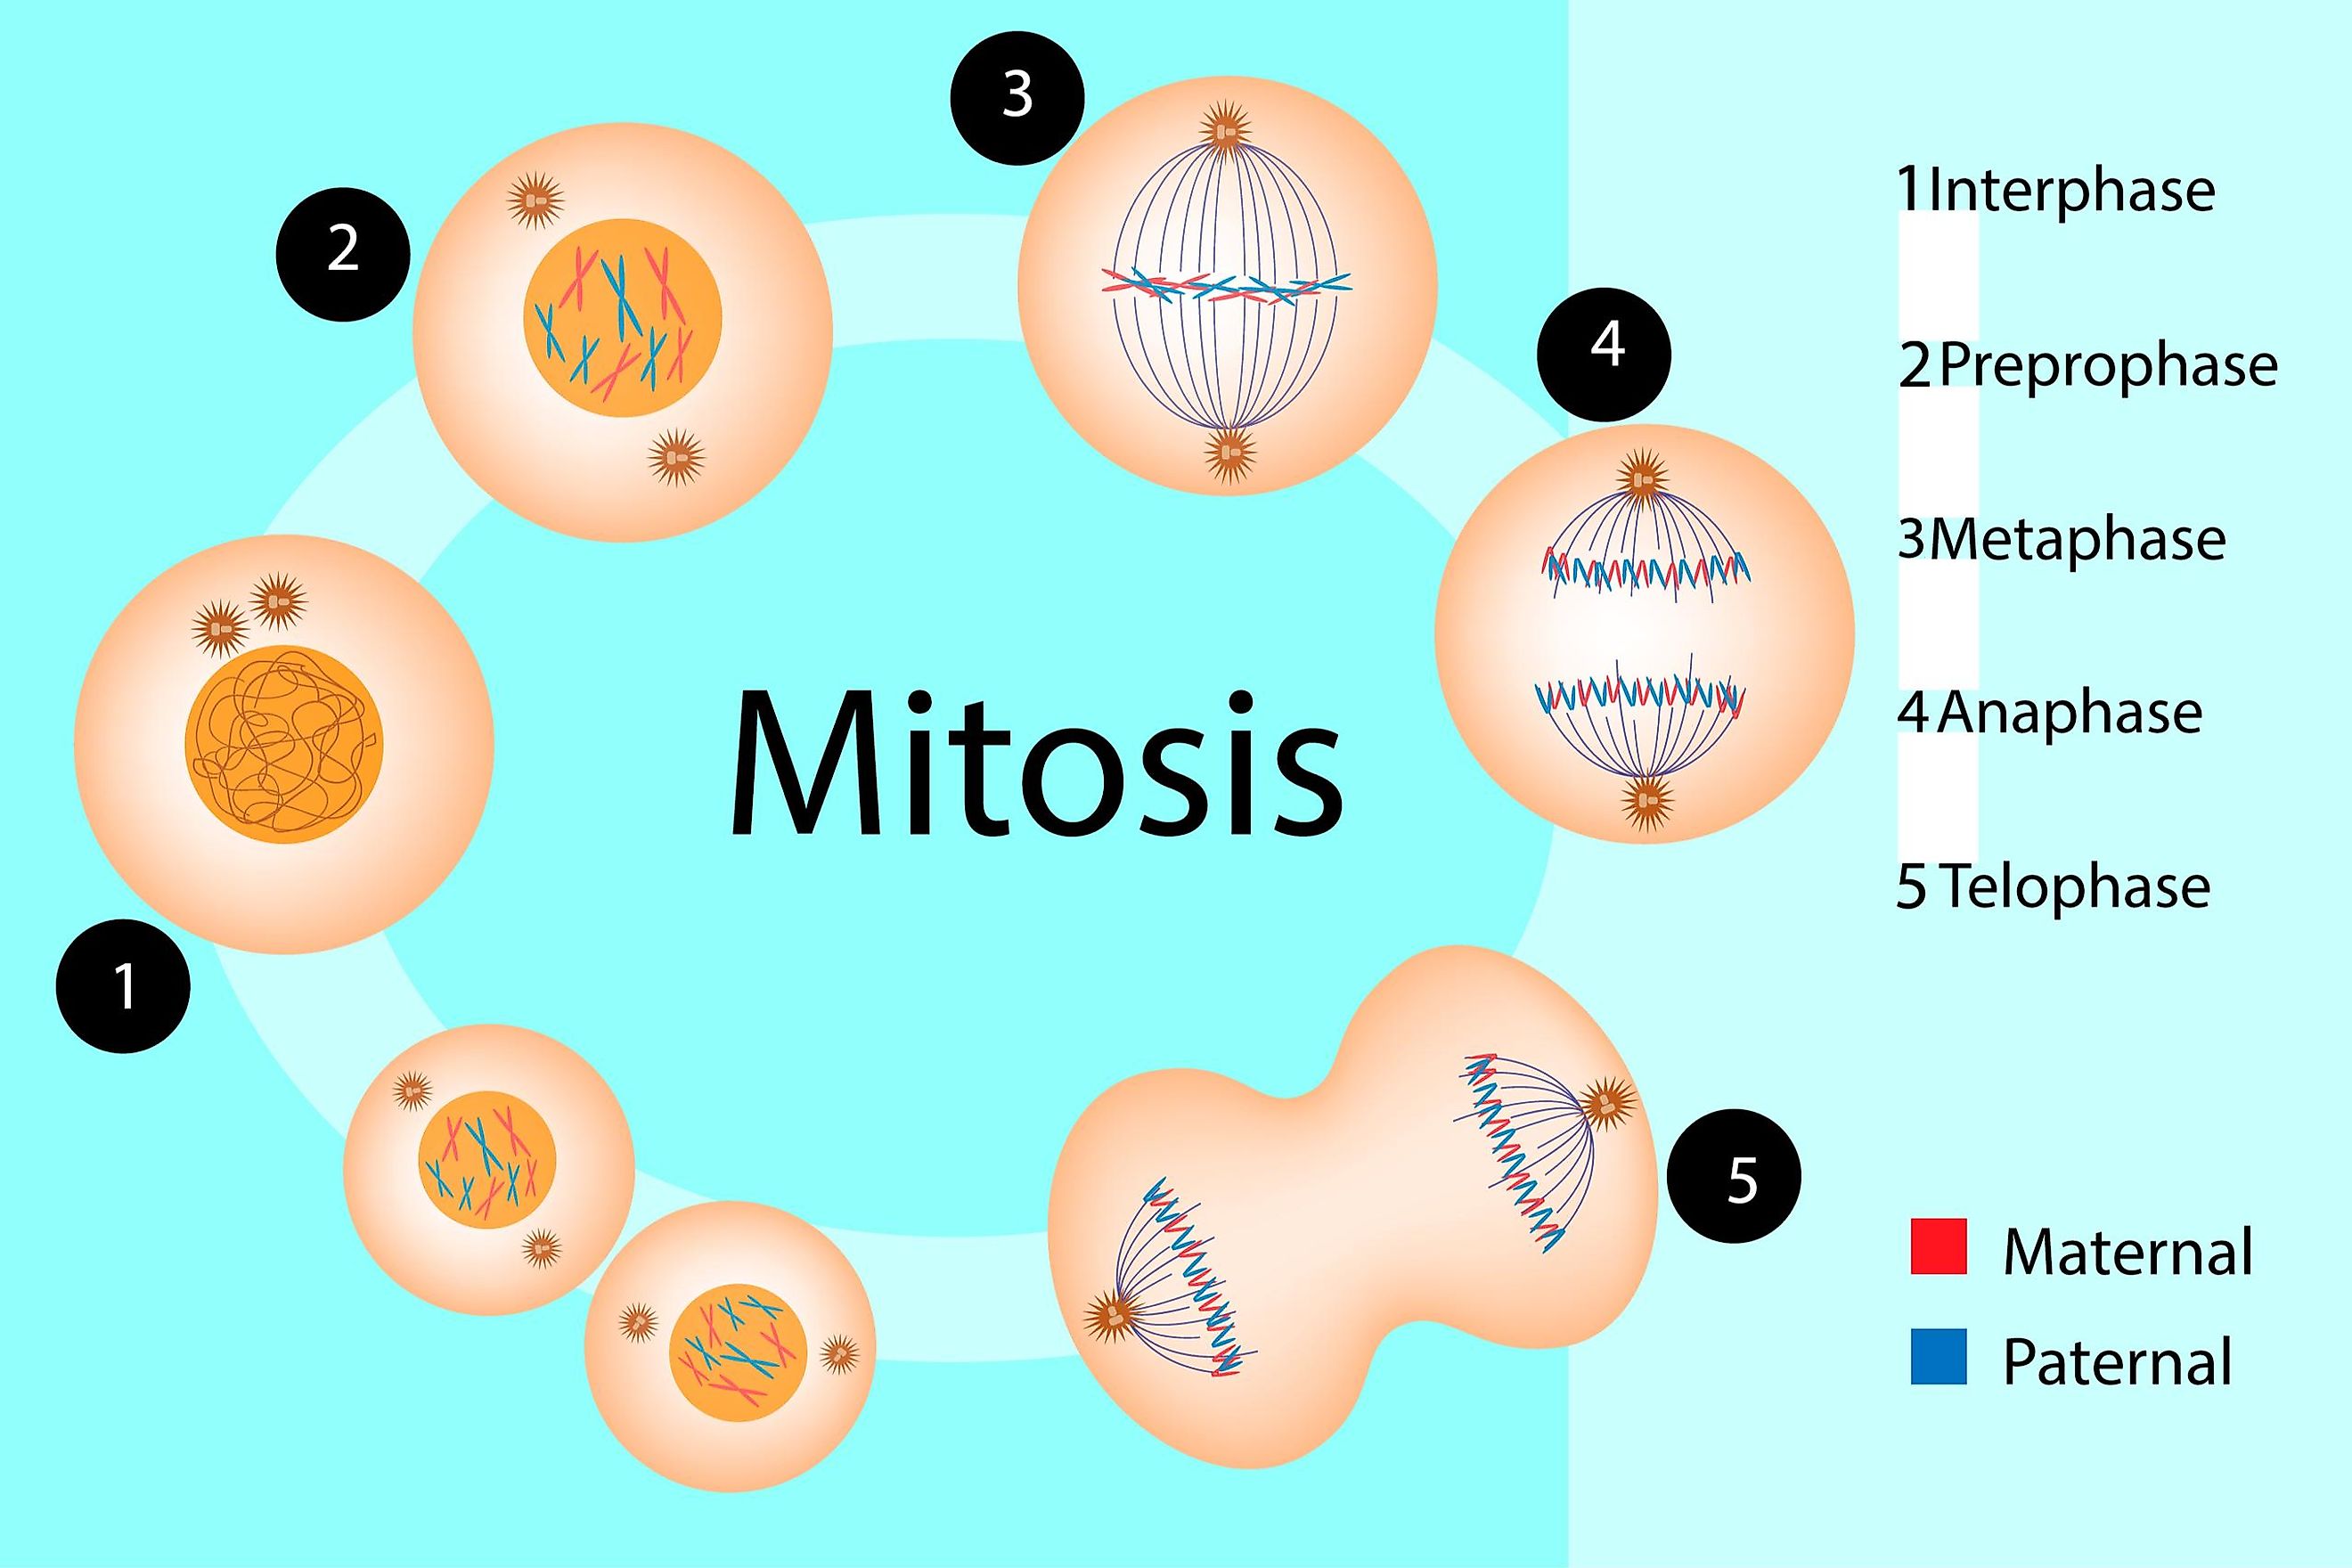 Meiosis occurs in reproductive tissues. 